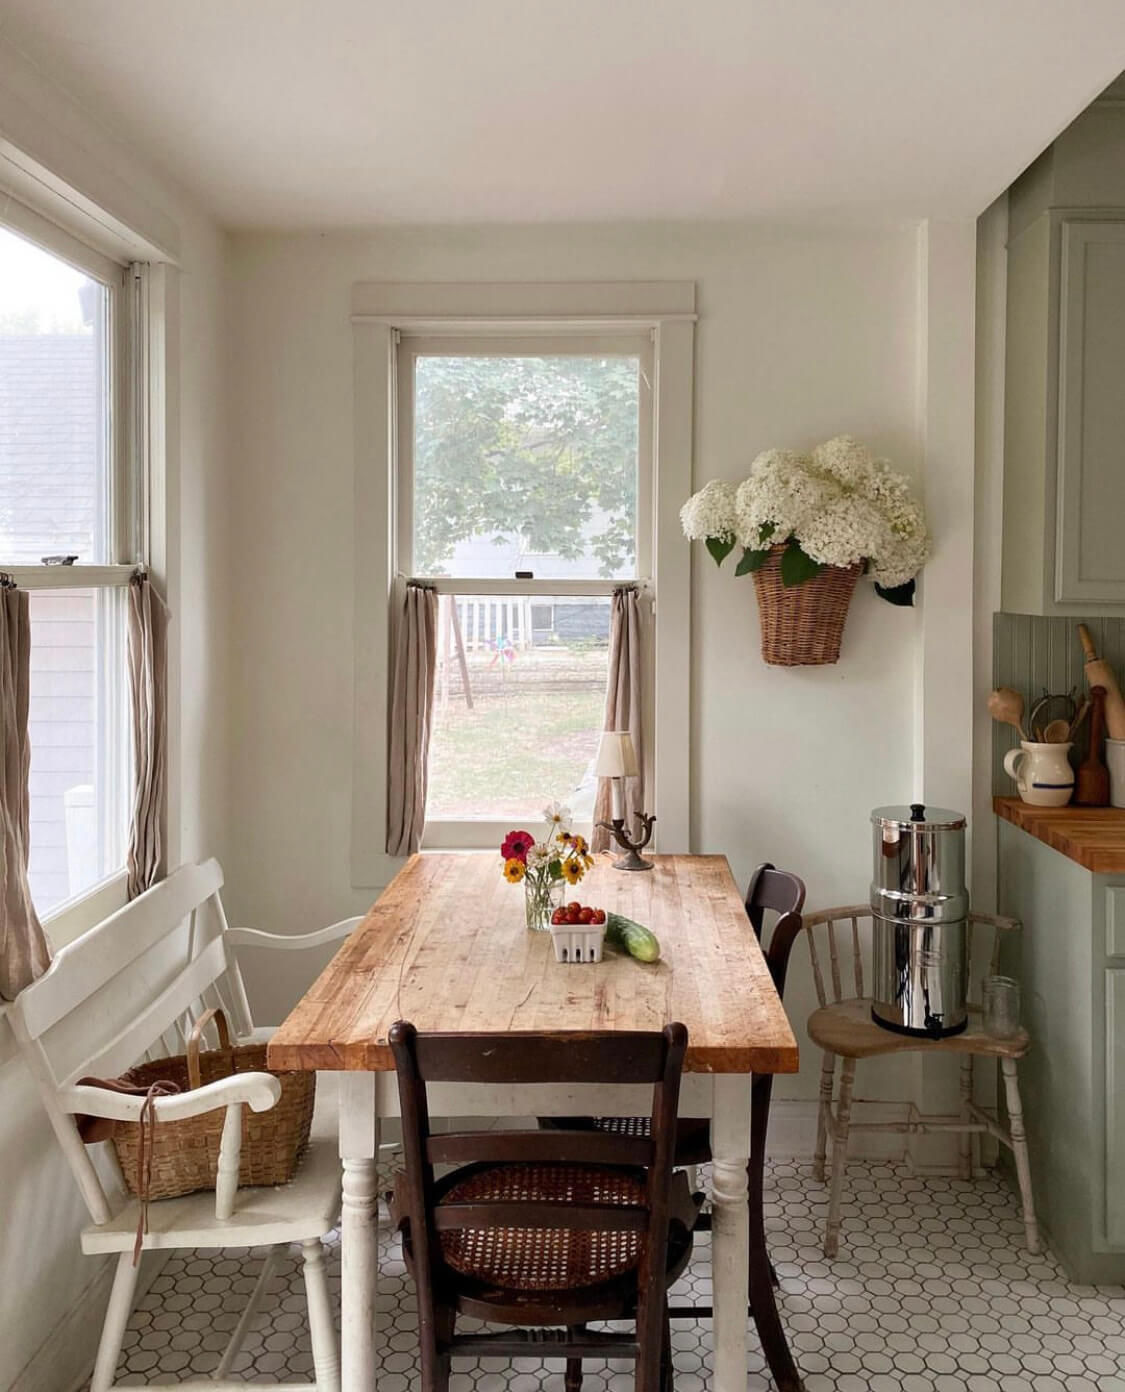 Kitchen table in a country style home interior